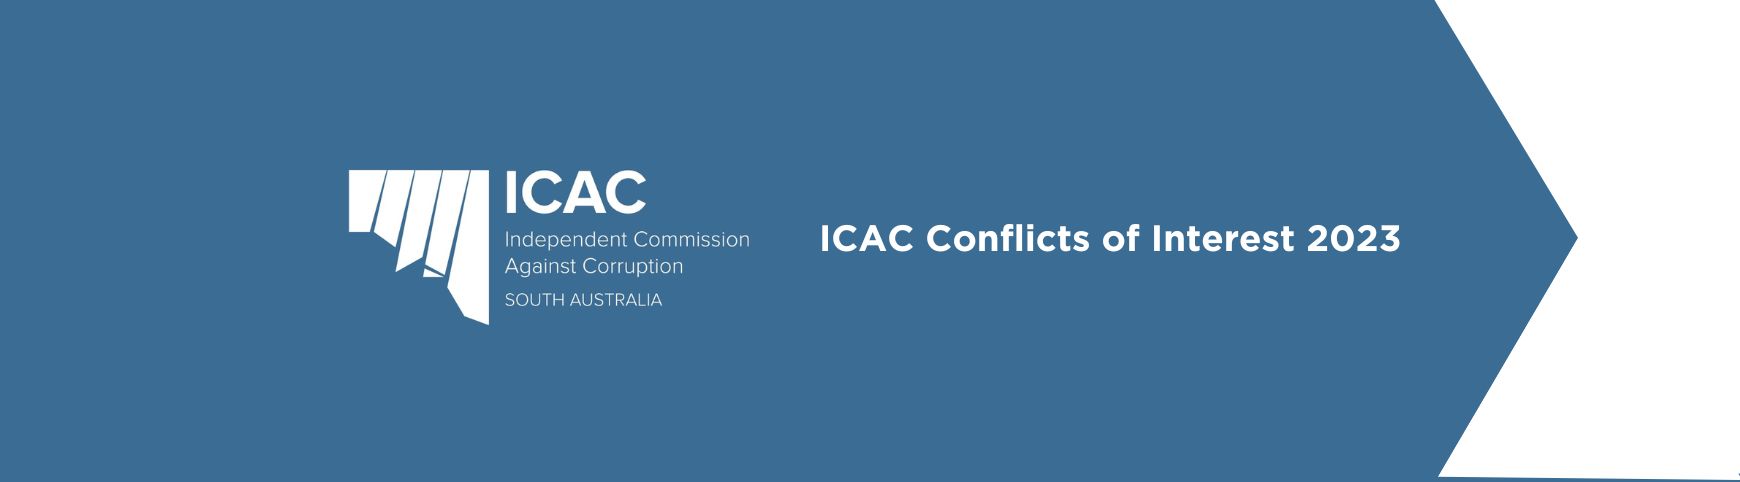 ICAC Conflicts of Interest